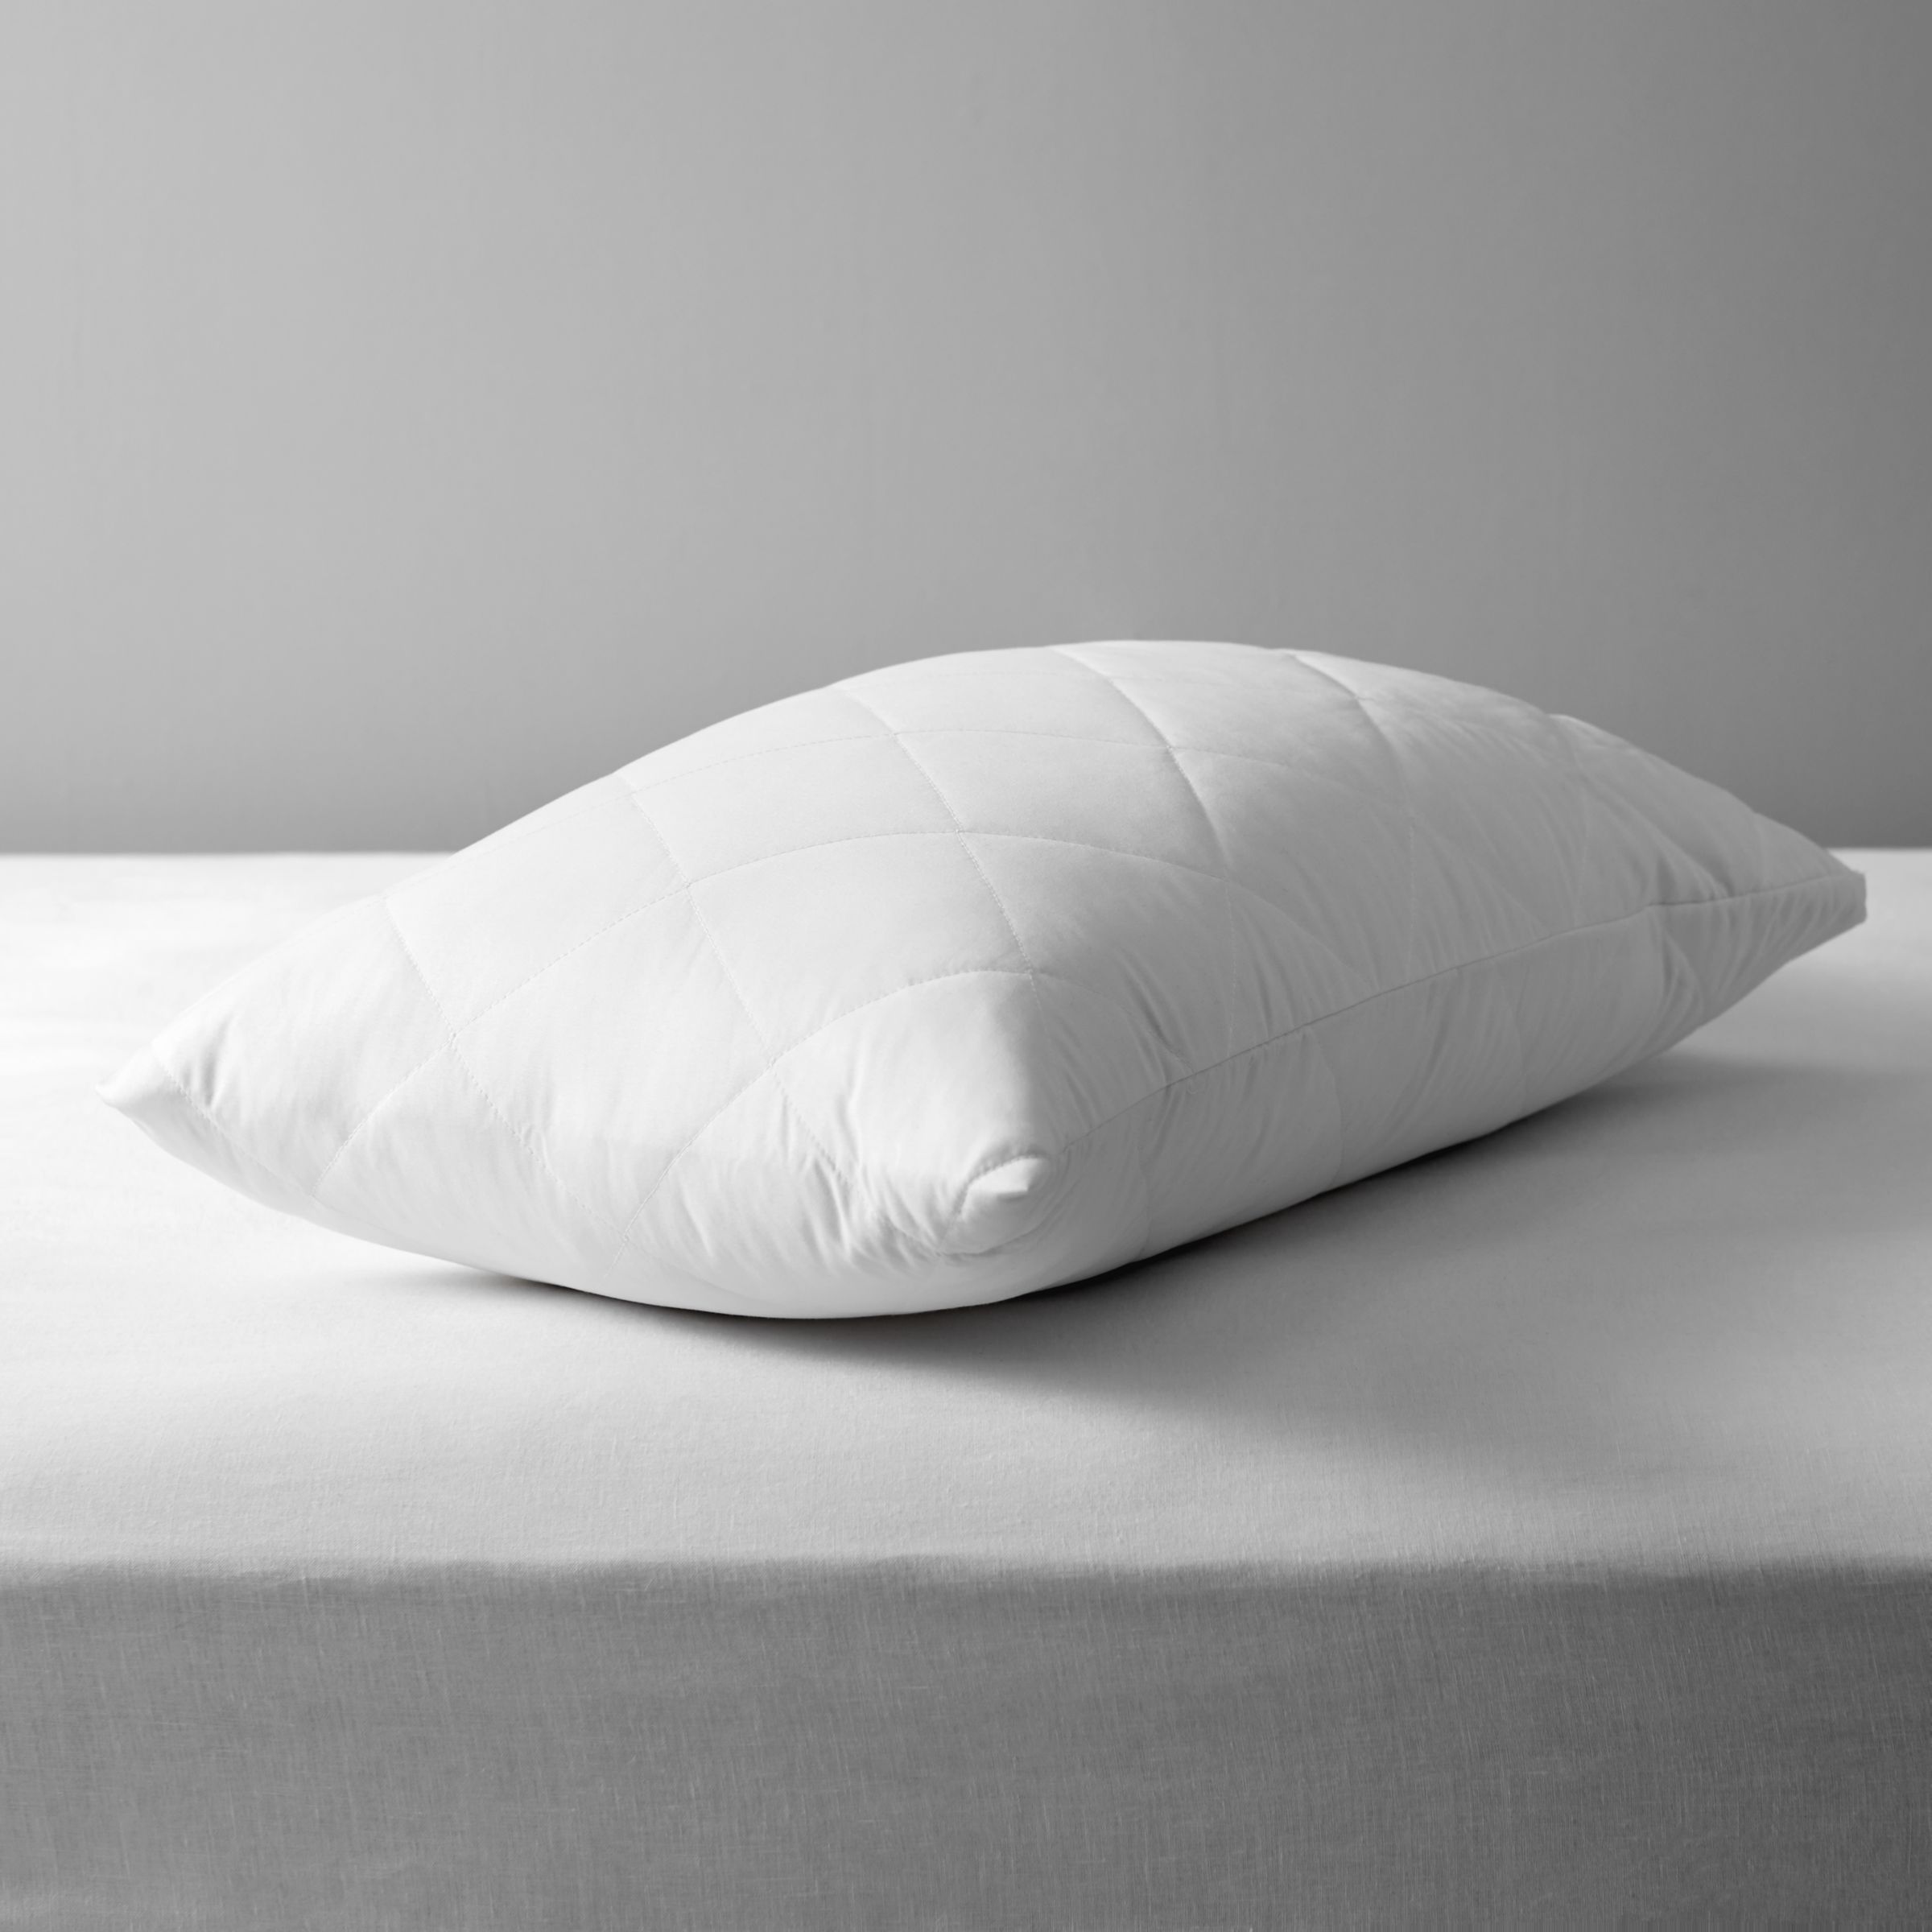 John Lewis & Partners Specialist Synthetic Waterproof Quilted Standard Pillow Protector